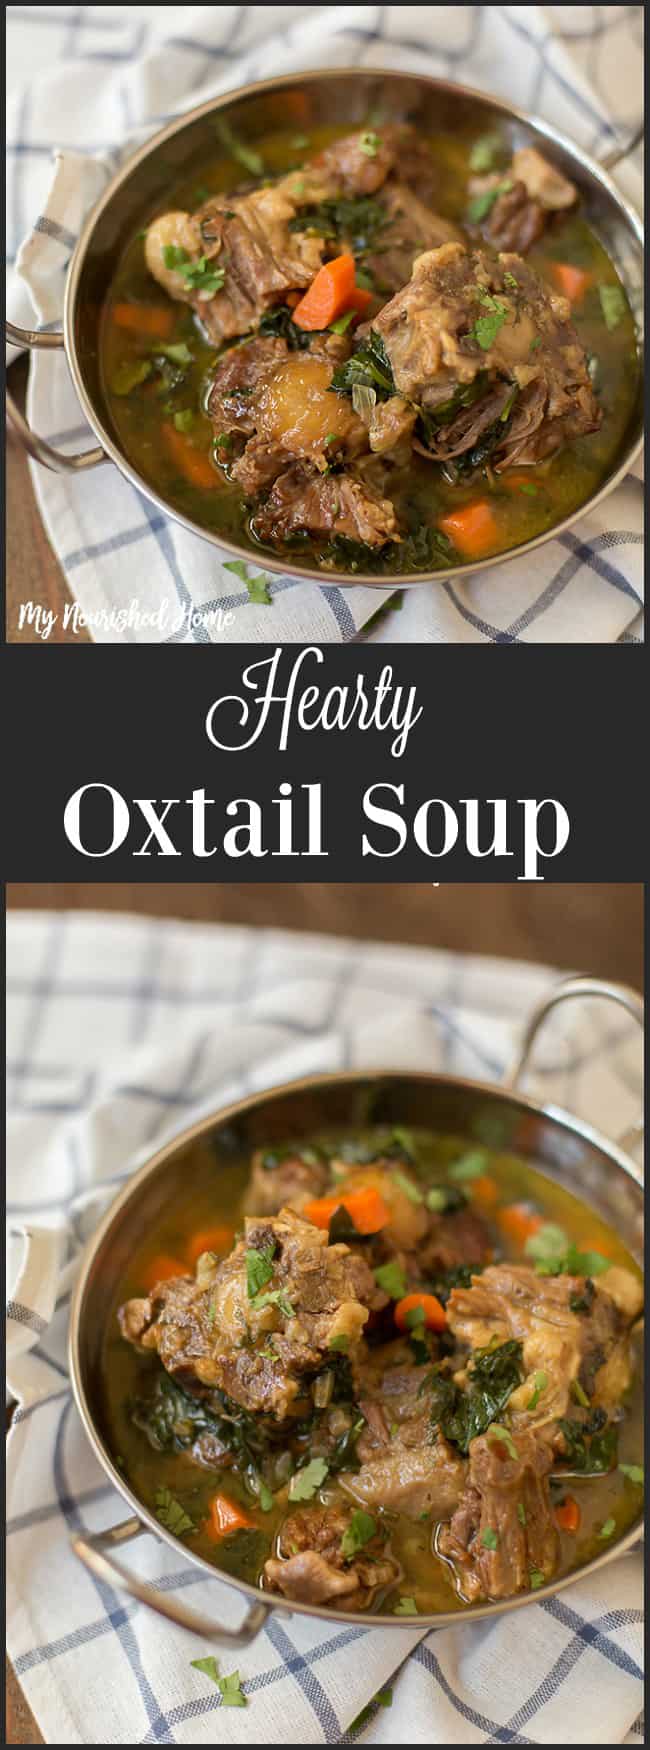 This hearty Oxtail Soup Recipe is thicker than a soup, but not quite a stew. Rich and full of veggies, you are going to love this beefy flavor! #beef #recipe #stew #oxtail